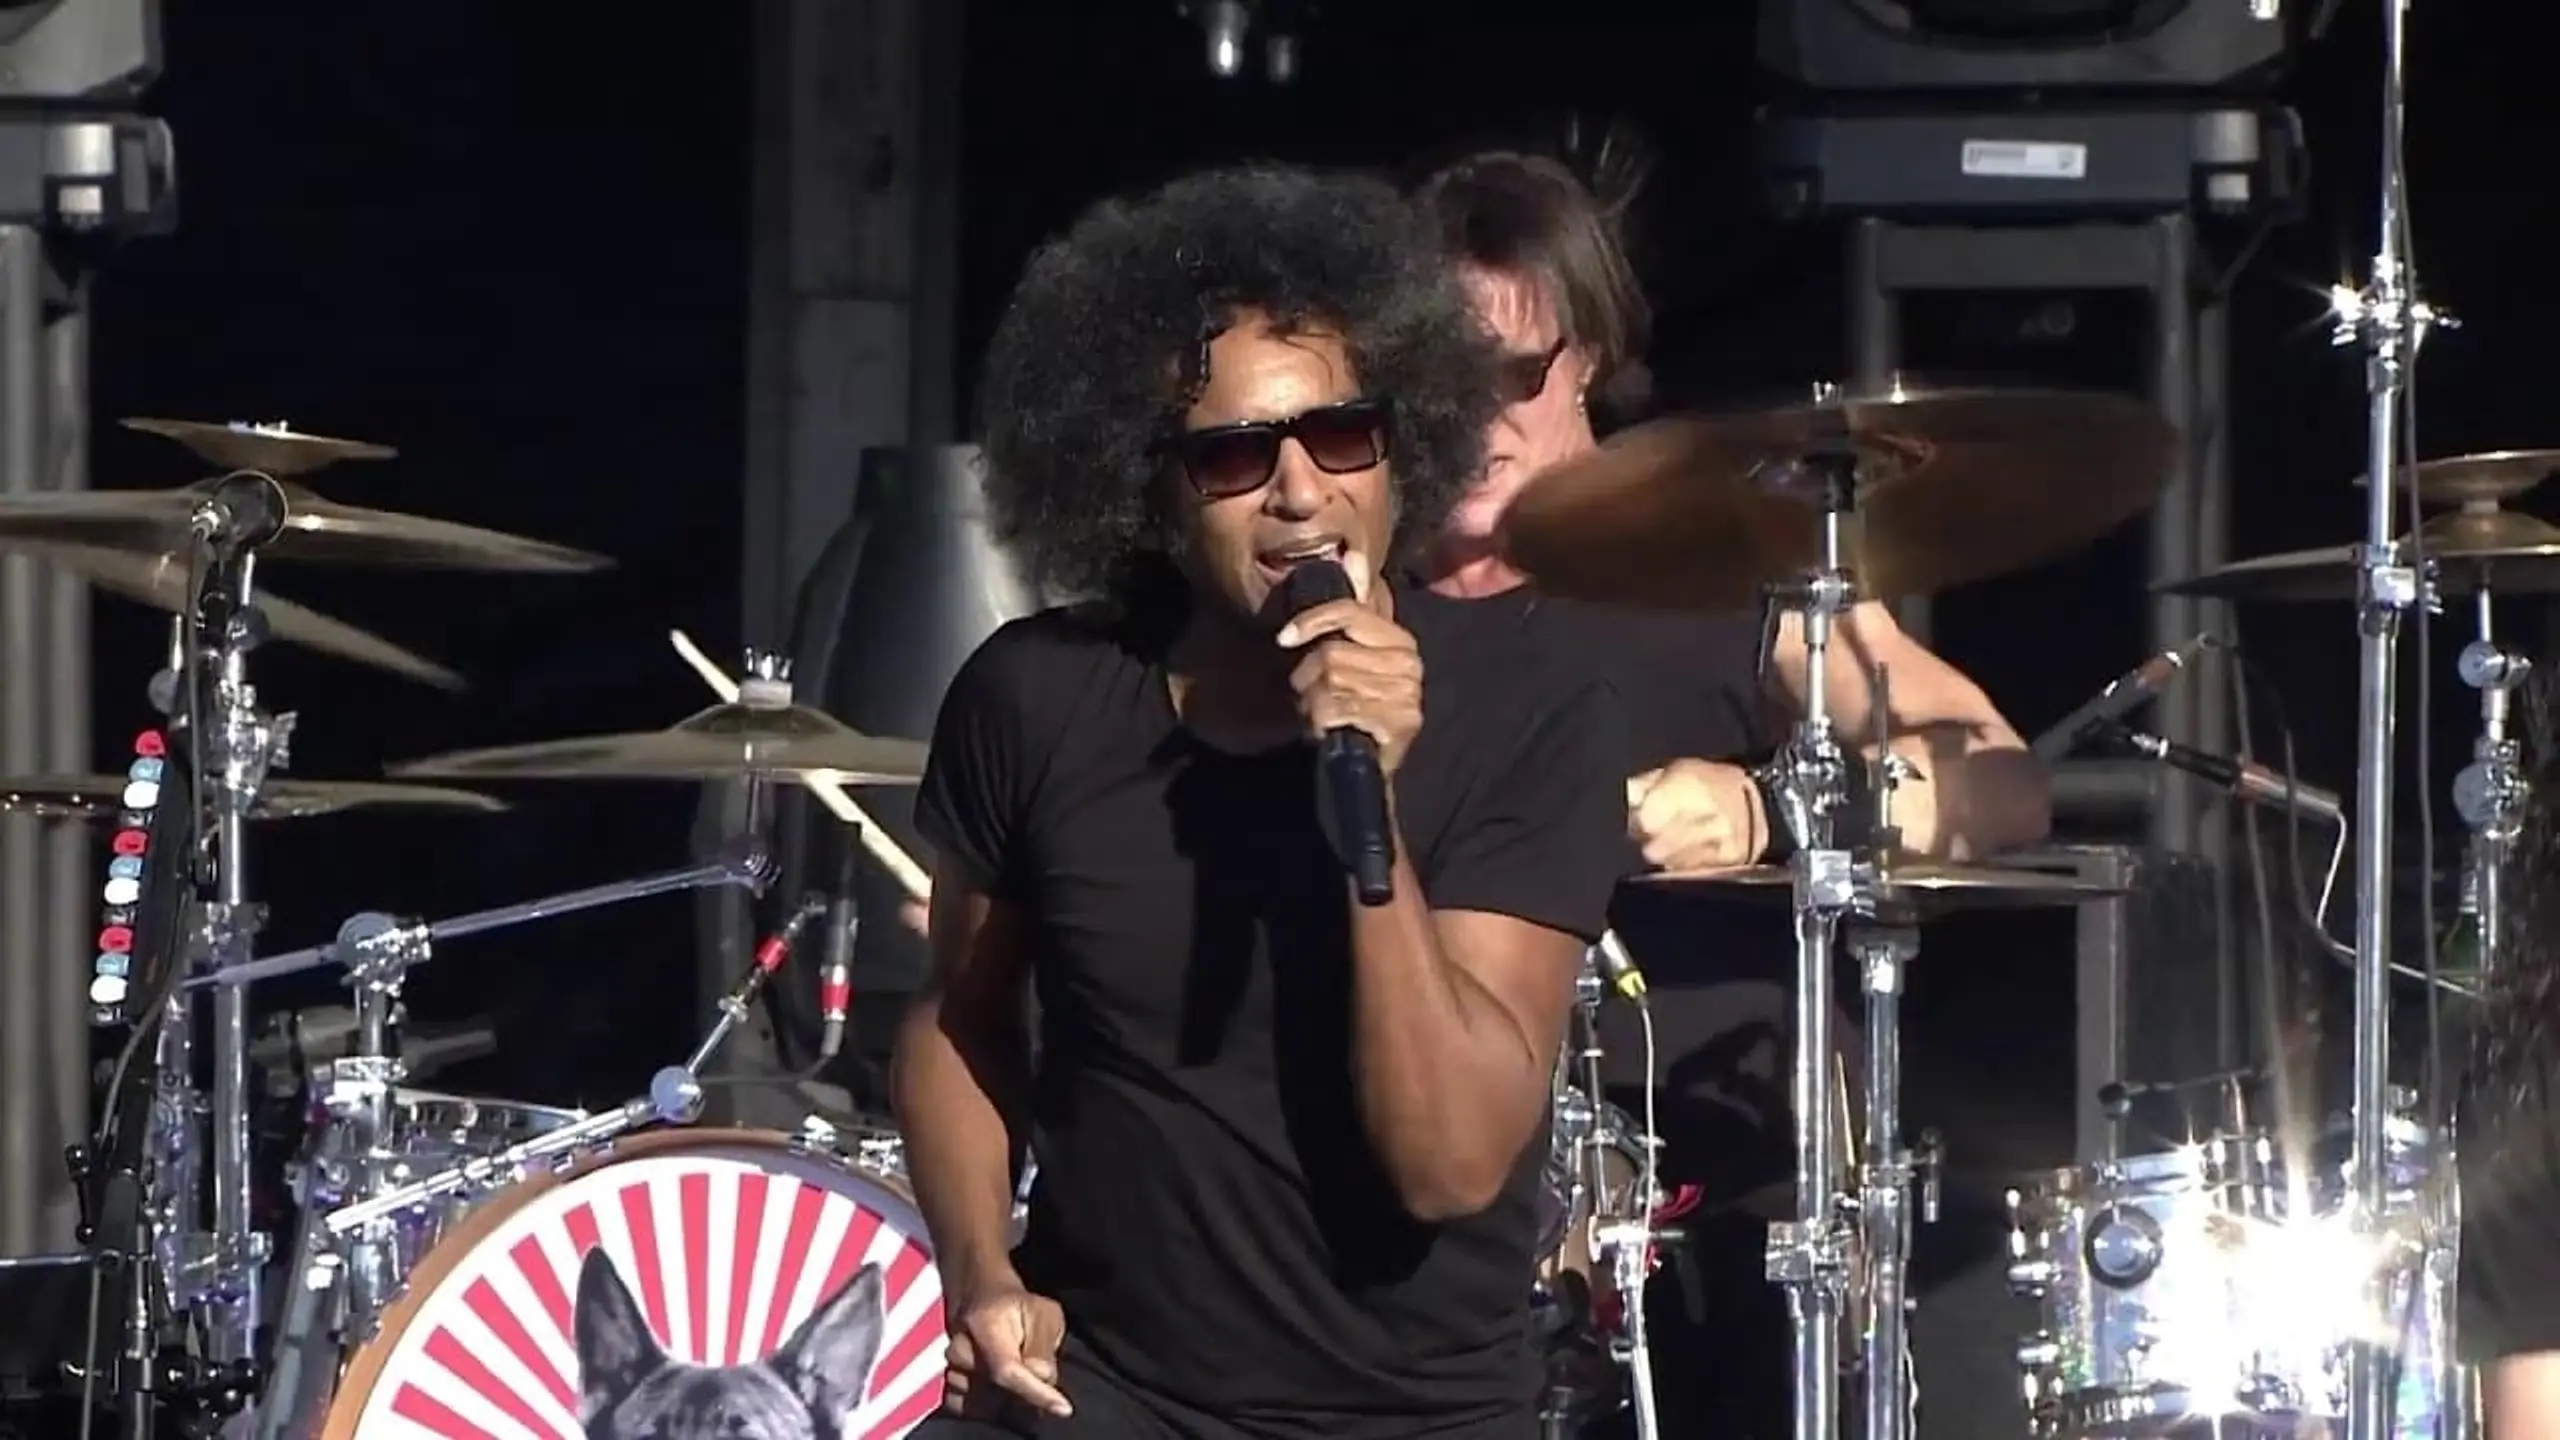 Alice In Chains - Rock Am Ring